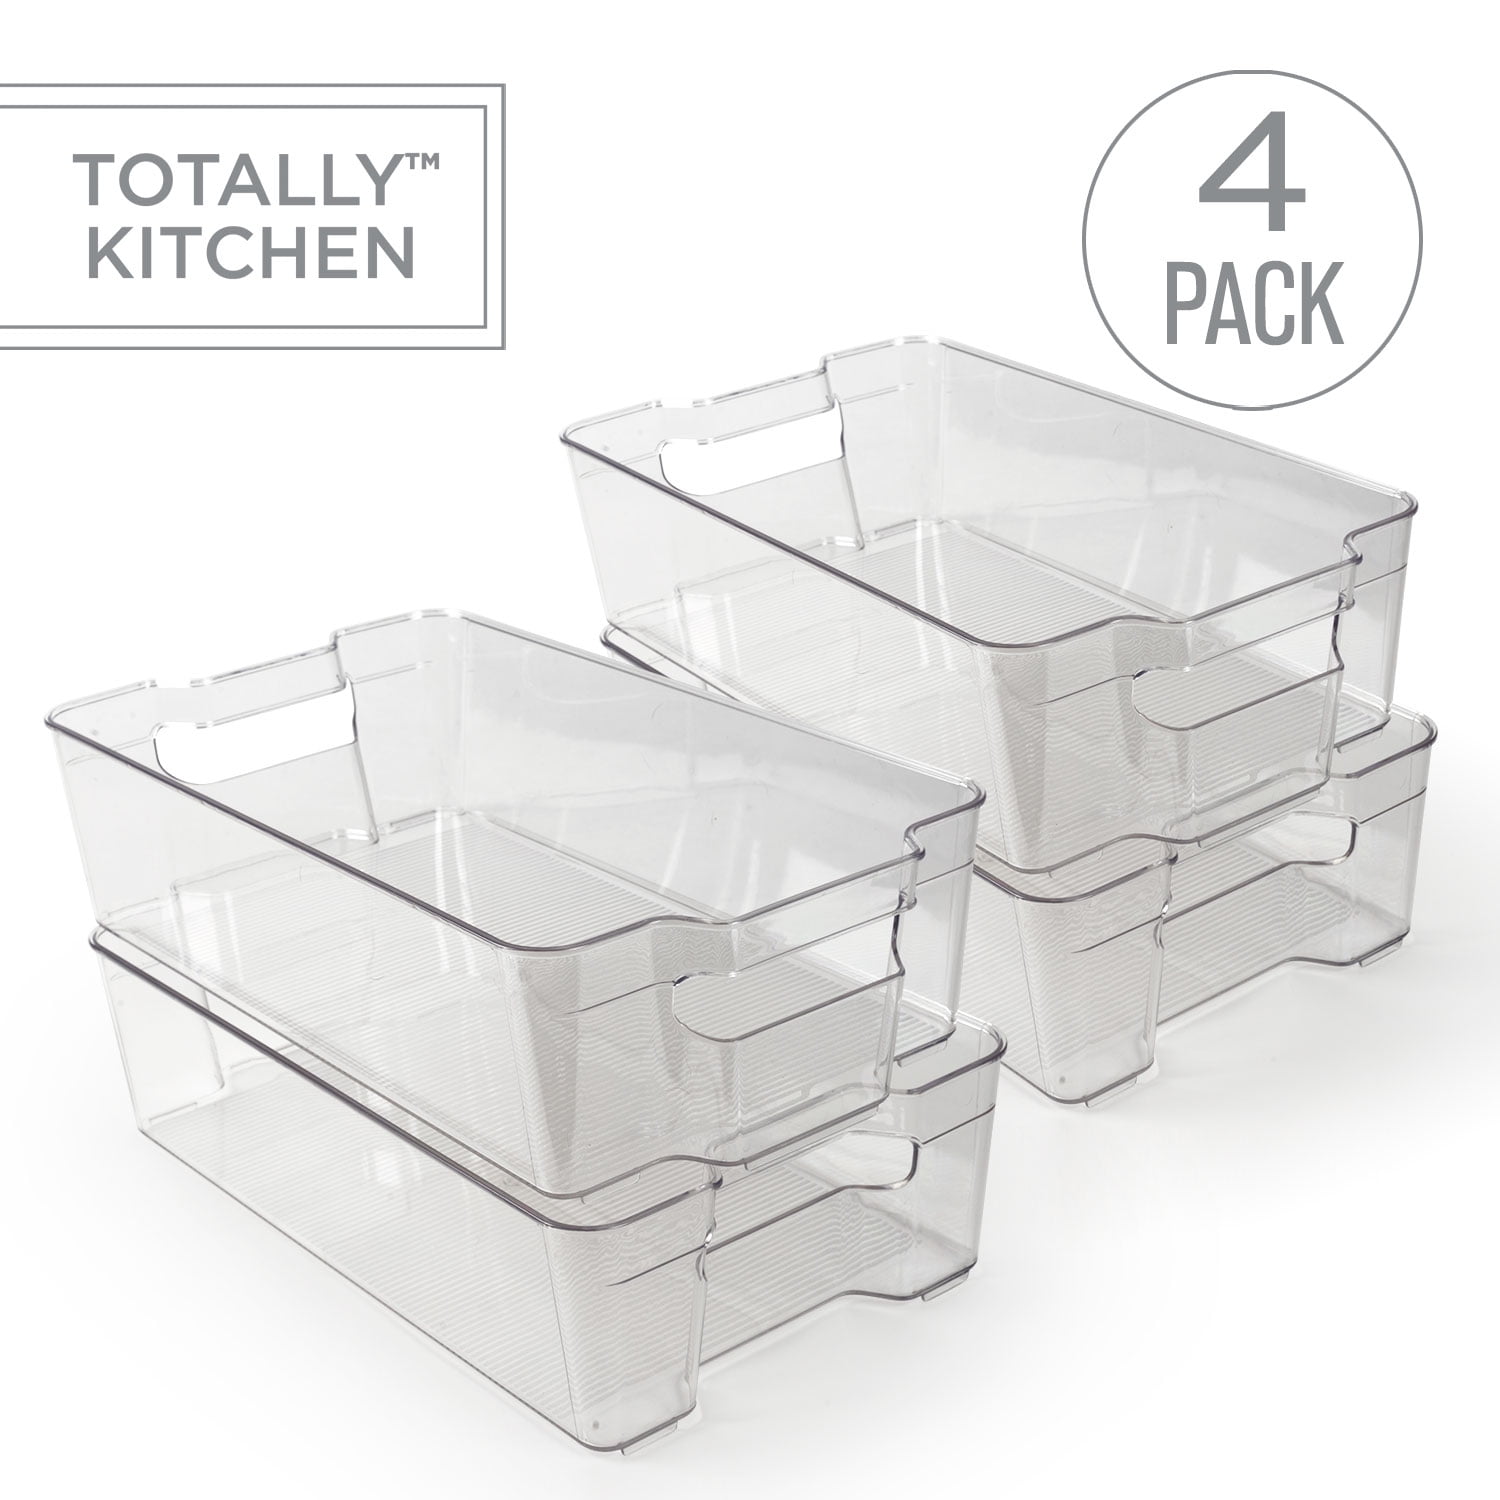 Lachesis Stackable Refrigerator Organizer Bins, Fridge Clear Bins with Handles Kitchen Organizer Container for Freezer, Pantry, Cabinets, Drawer, Shelves